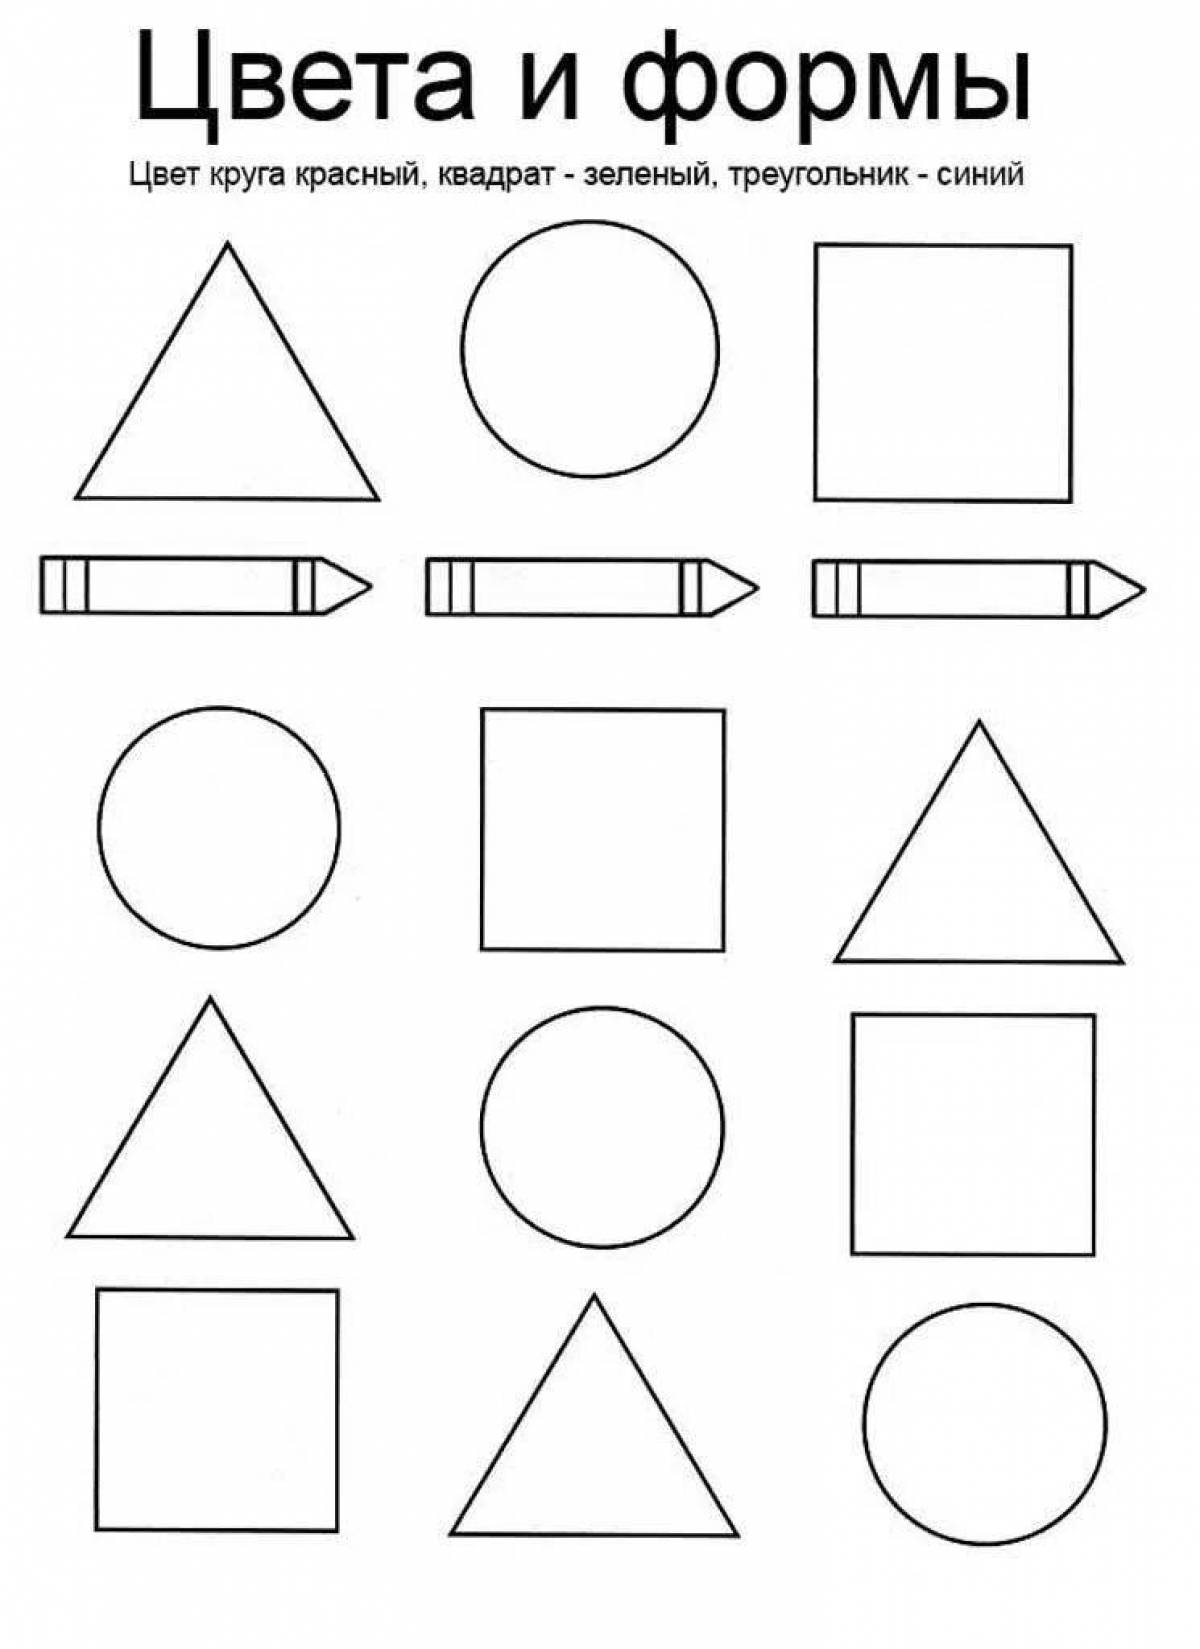 Geometric figures for children 4 5 years old #26